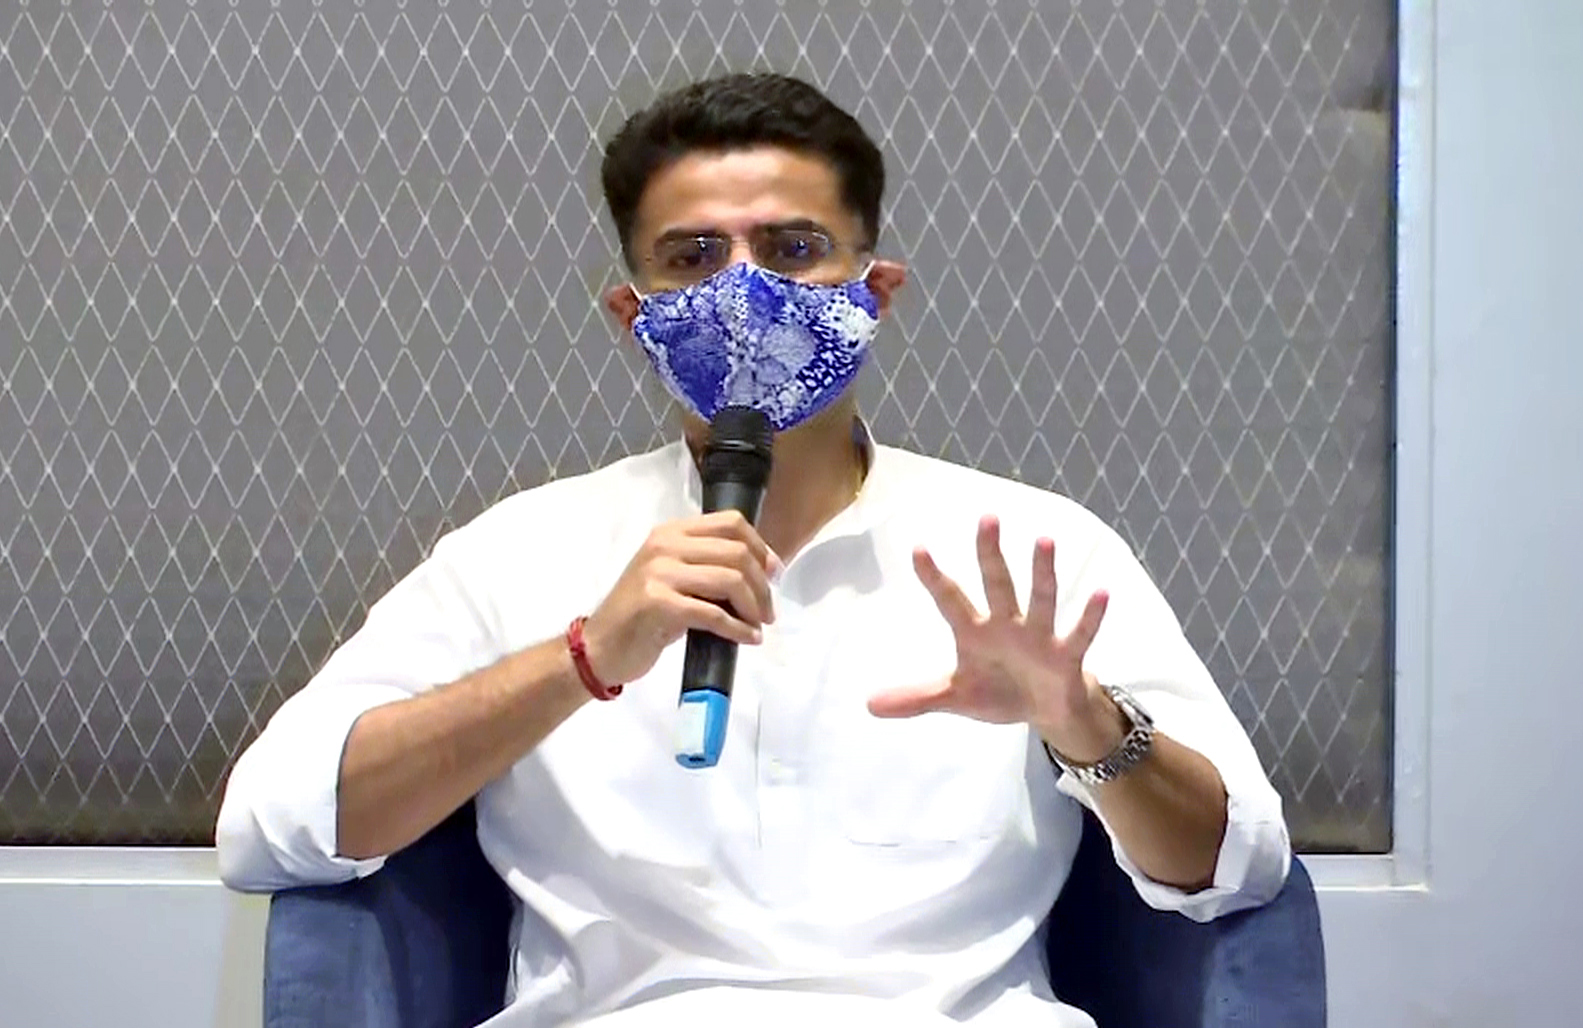 Not demanded any post, raised issues regarding respect of party workers: Sachin Pilot